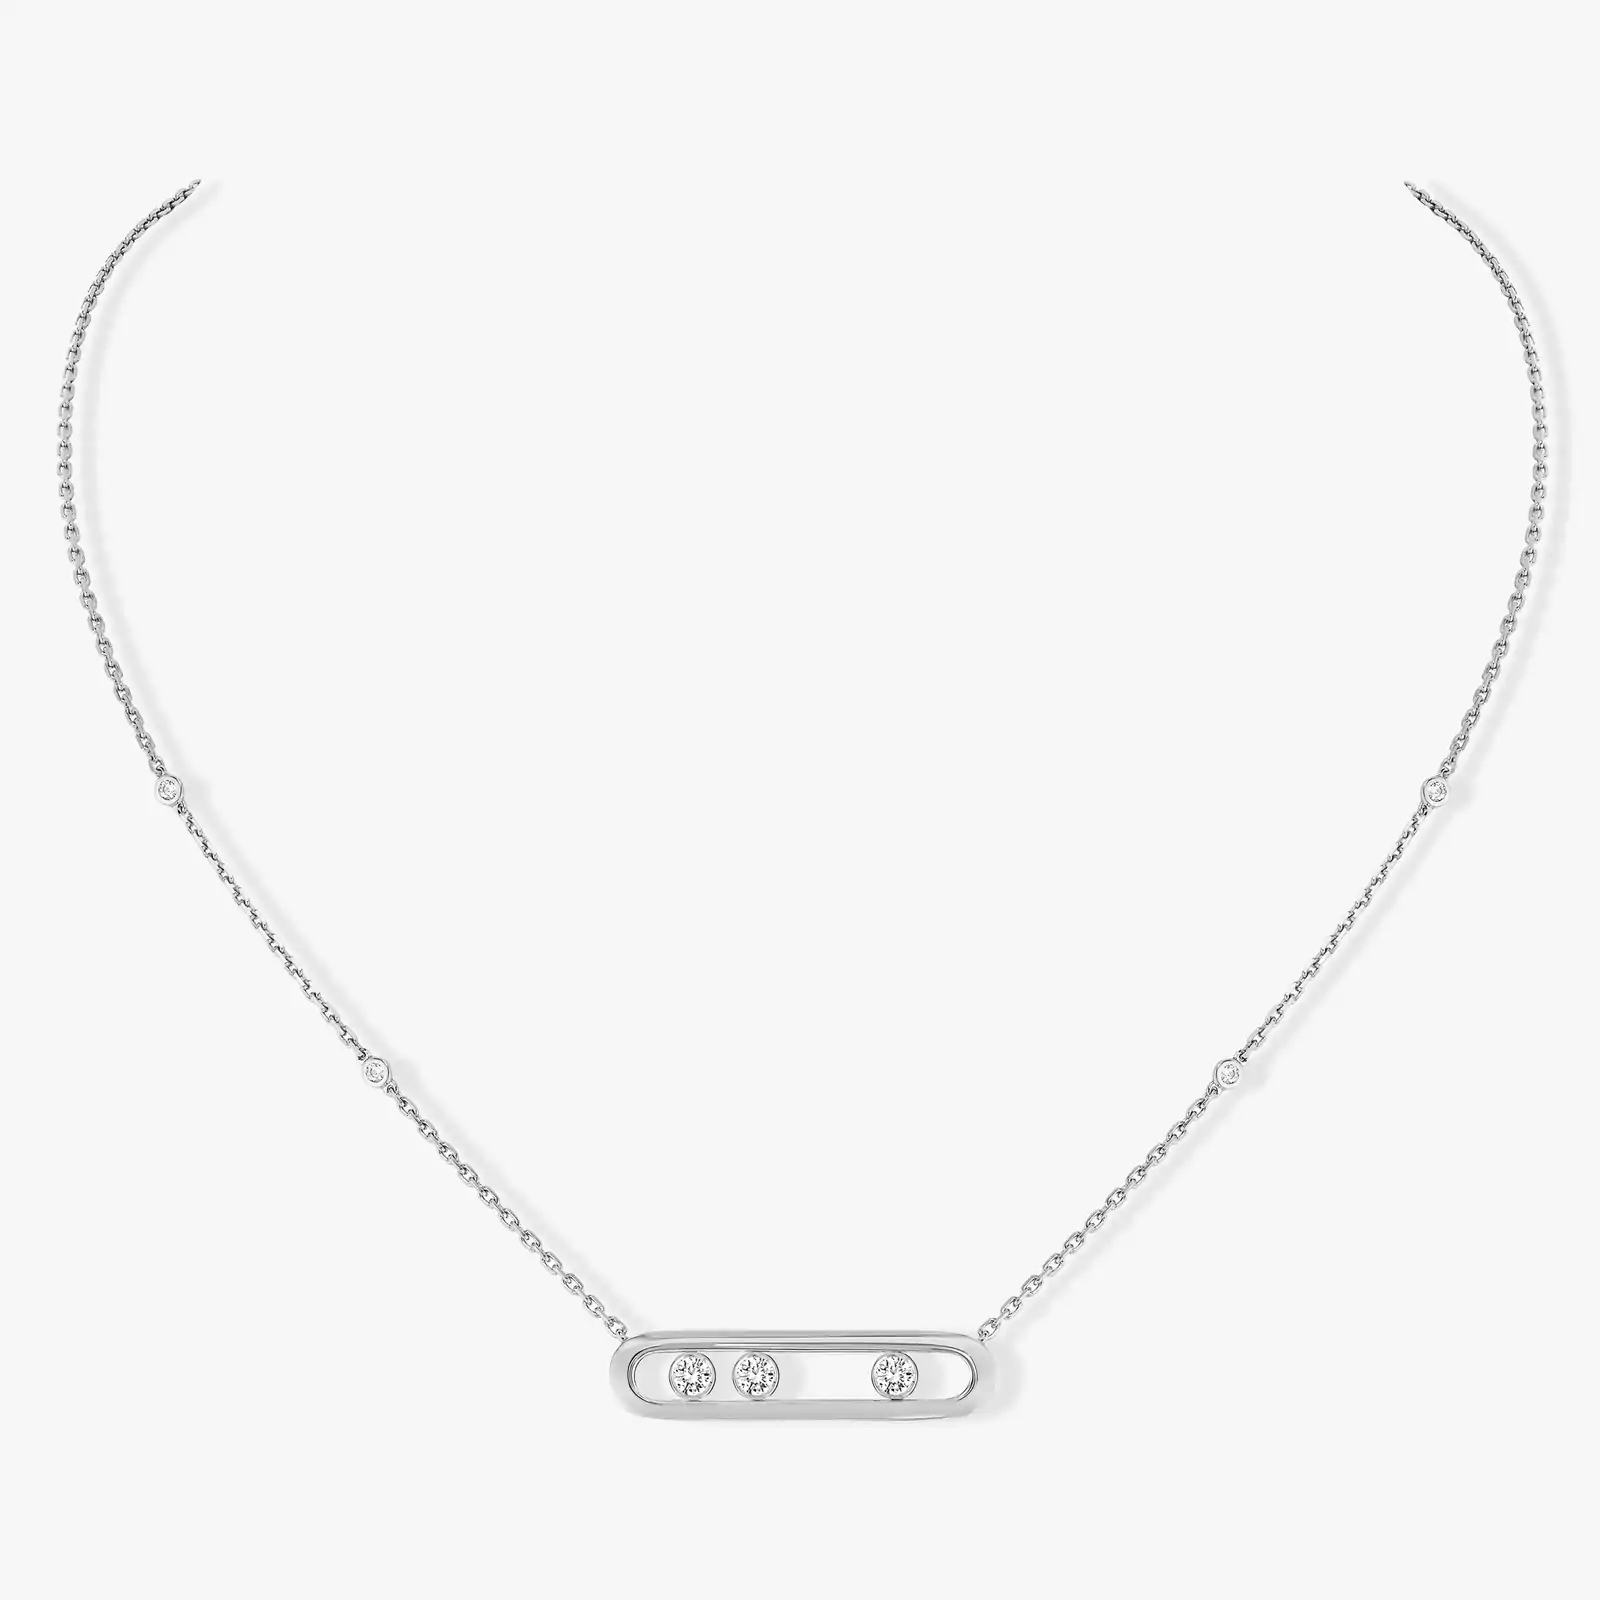 Collier Femme Or Blanc Diamant Move 03997-WG